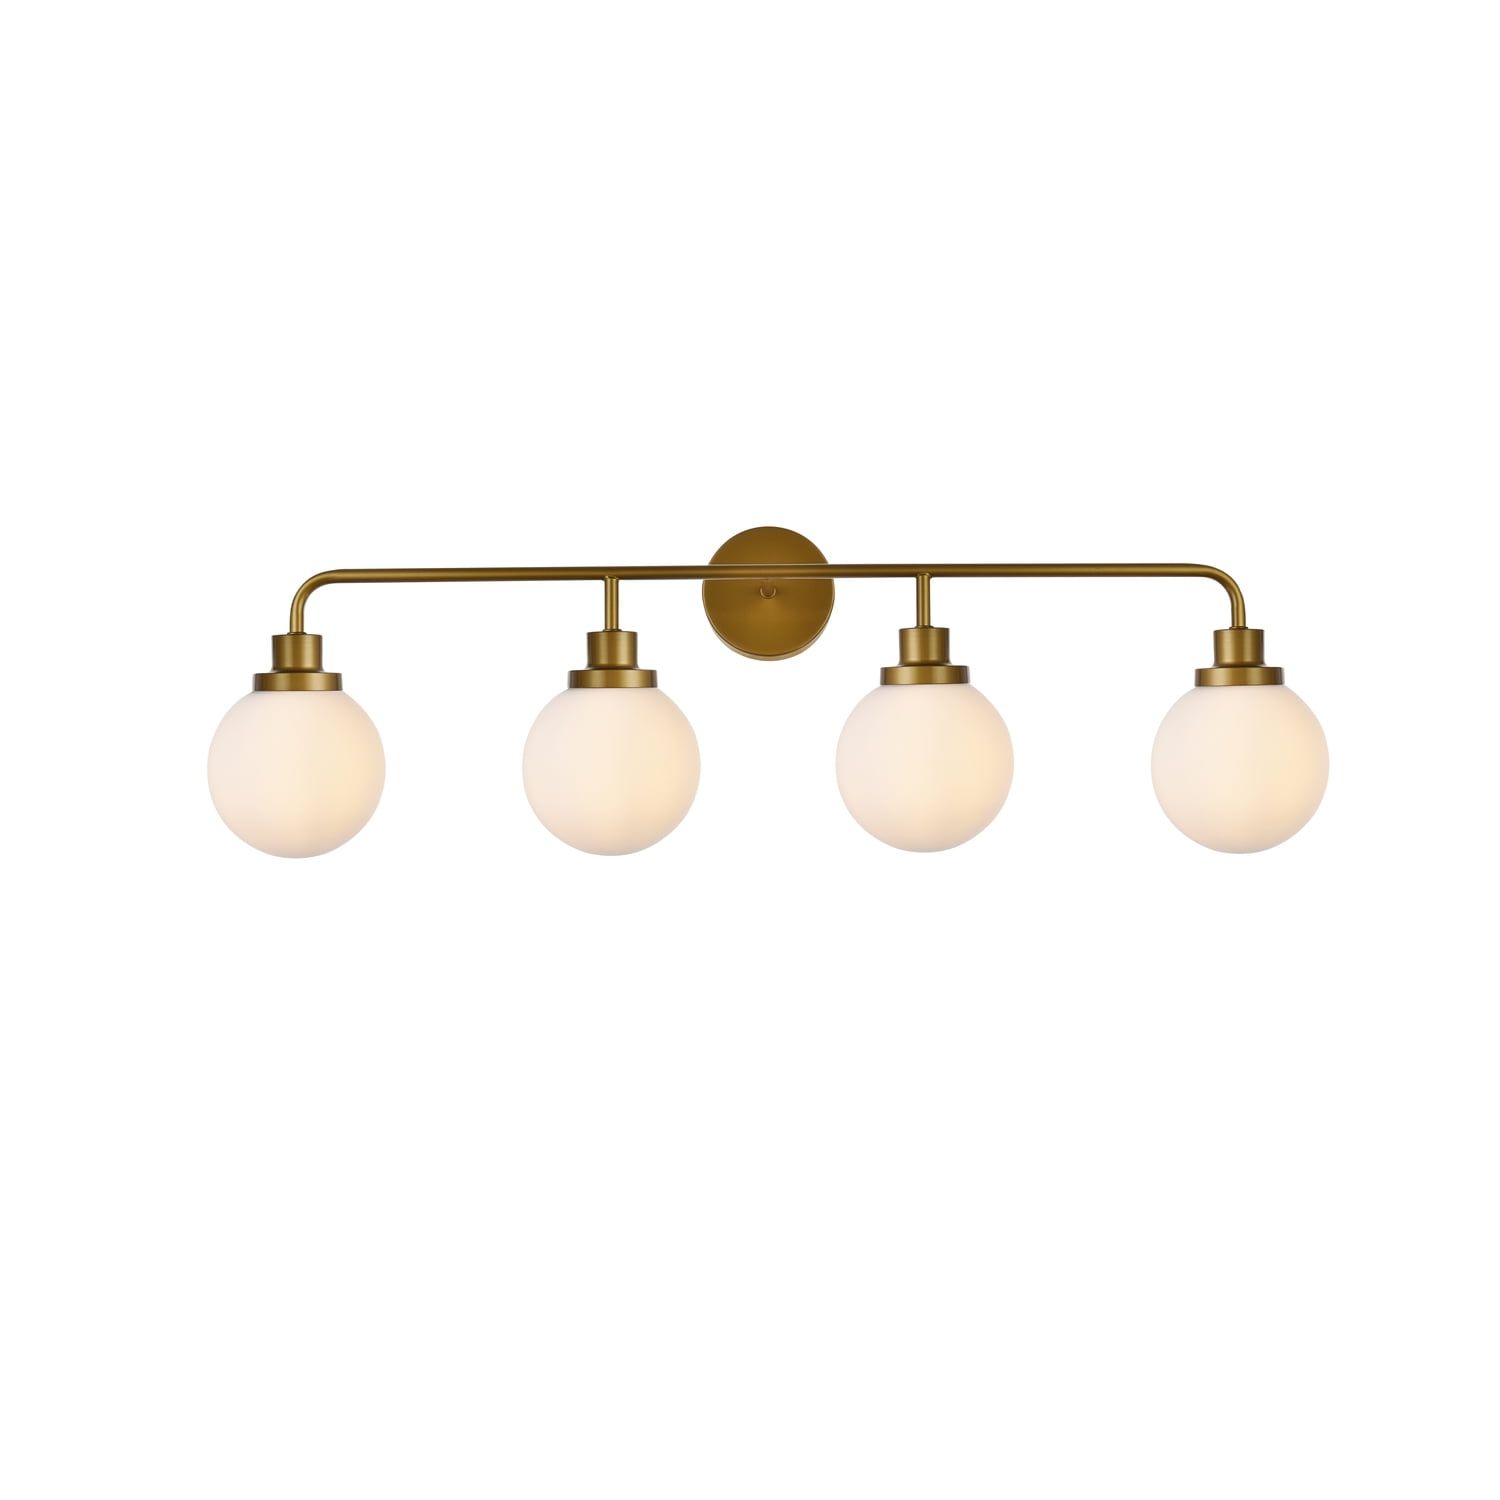 Hanson 4-Light Brass and Frosted Glass Bath Sconce